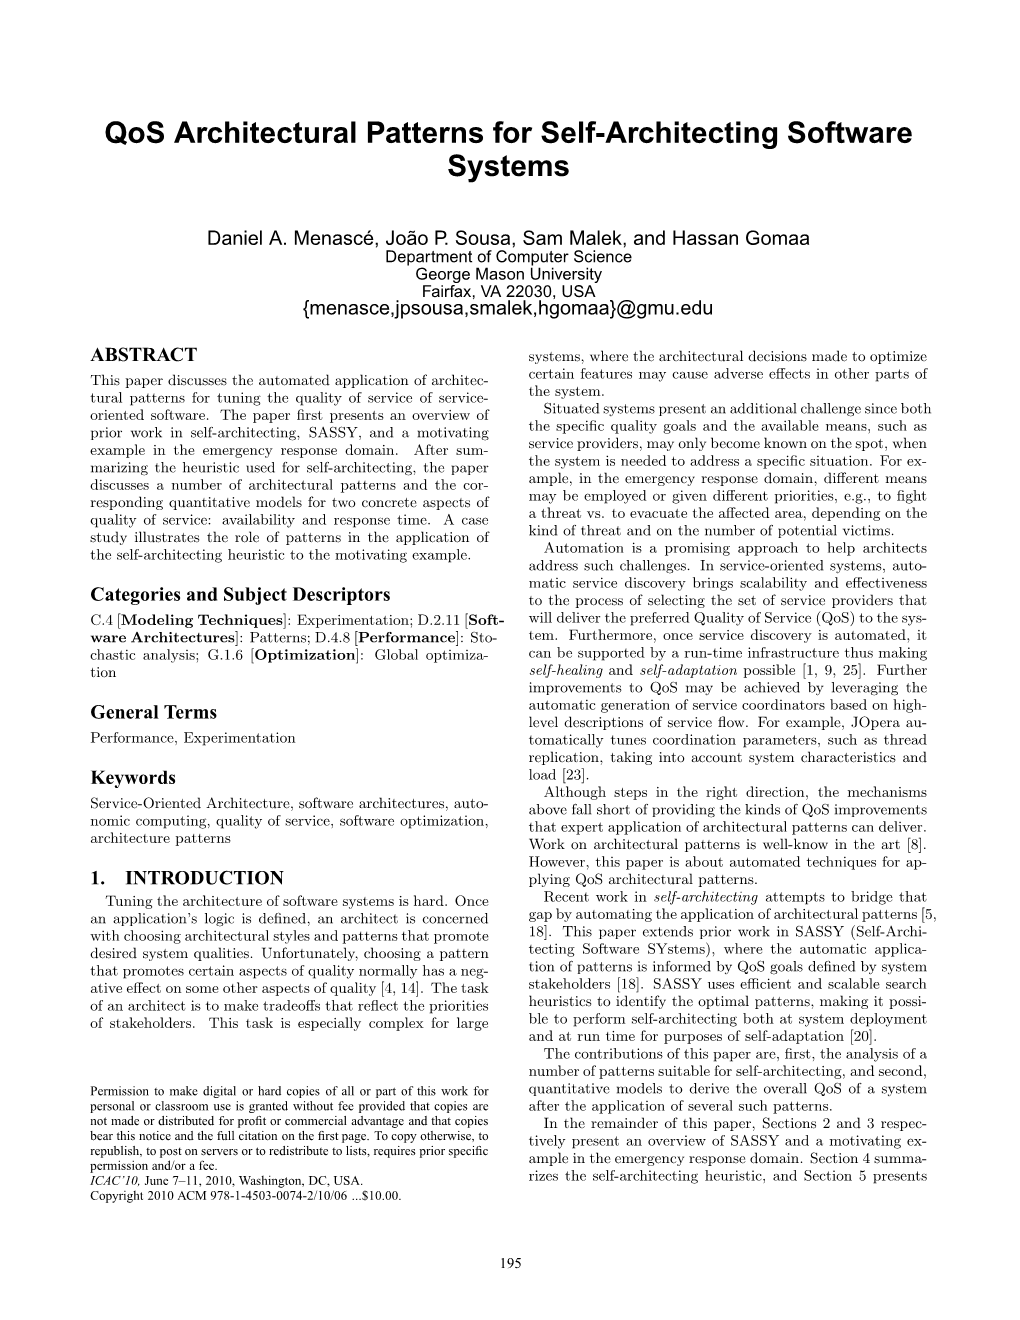 Qos Architectural Patterns for Self-Architecting Software Systems